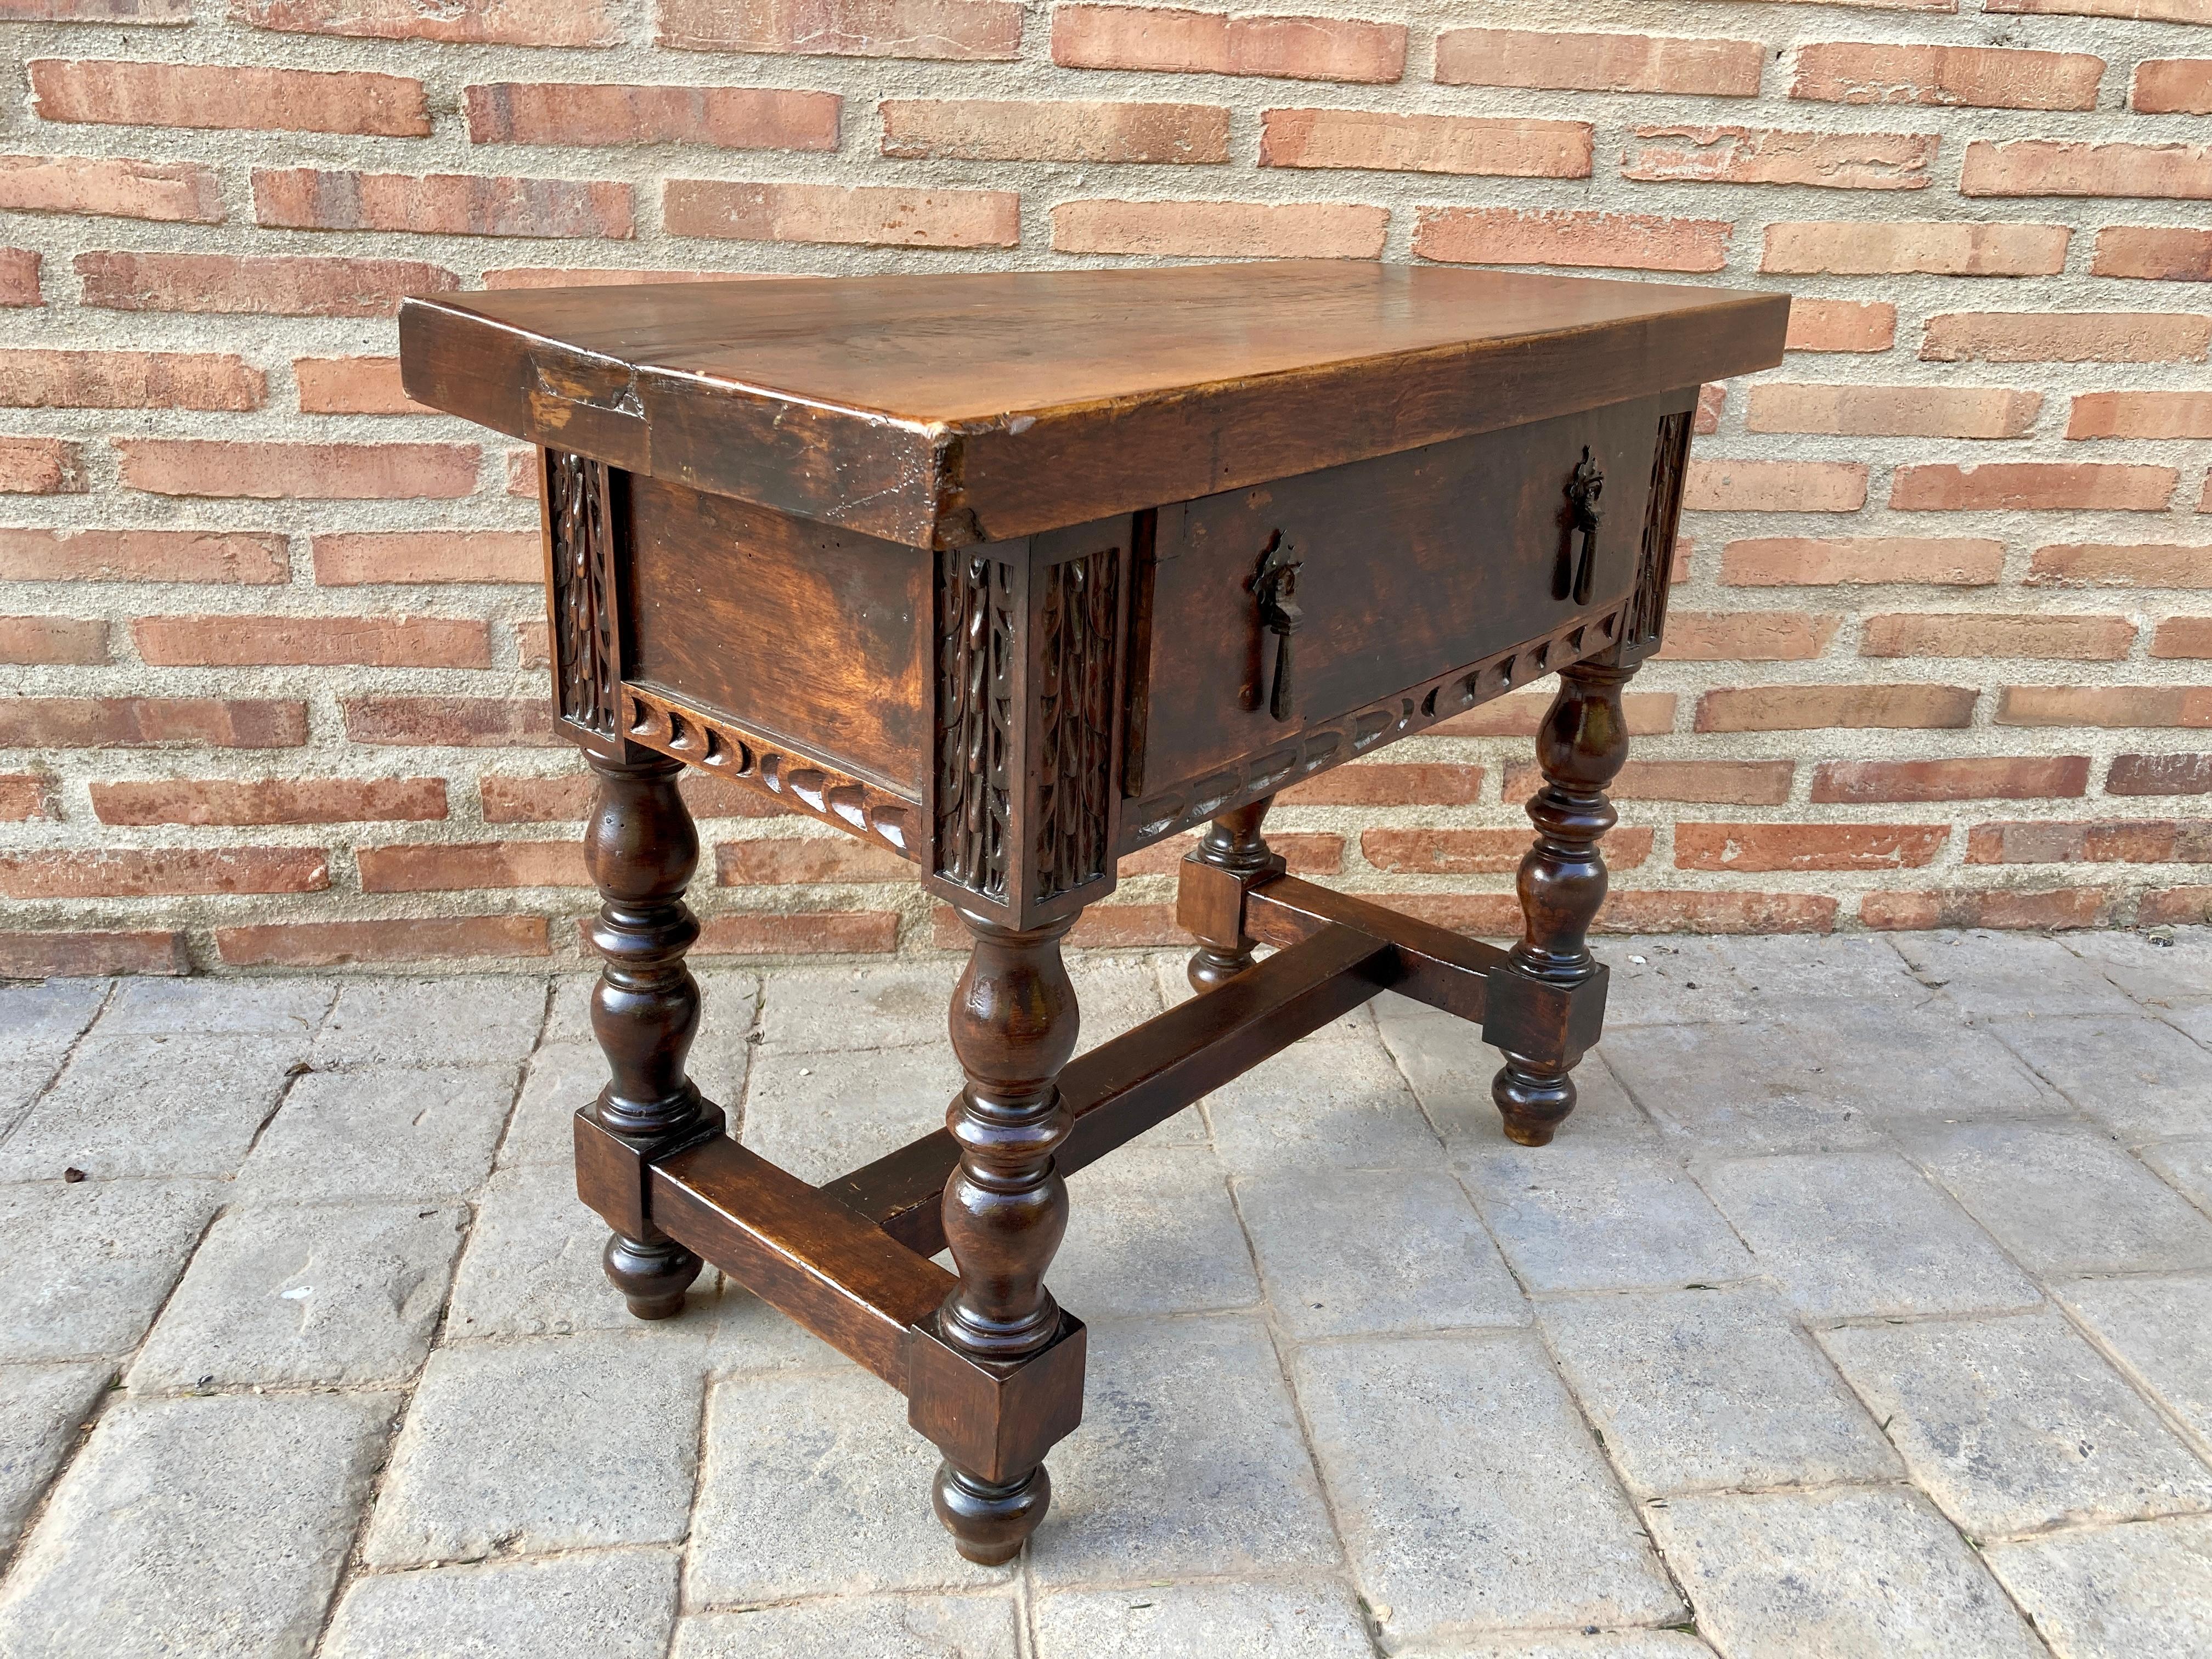 Walnut side table from the 19th century from Spain with a plank top, around the chest of drawers a hand-carved decorated molded edge and a drawer with very old iron handles, on the sides with carved panels and containing a single drawer in The